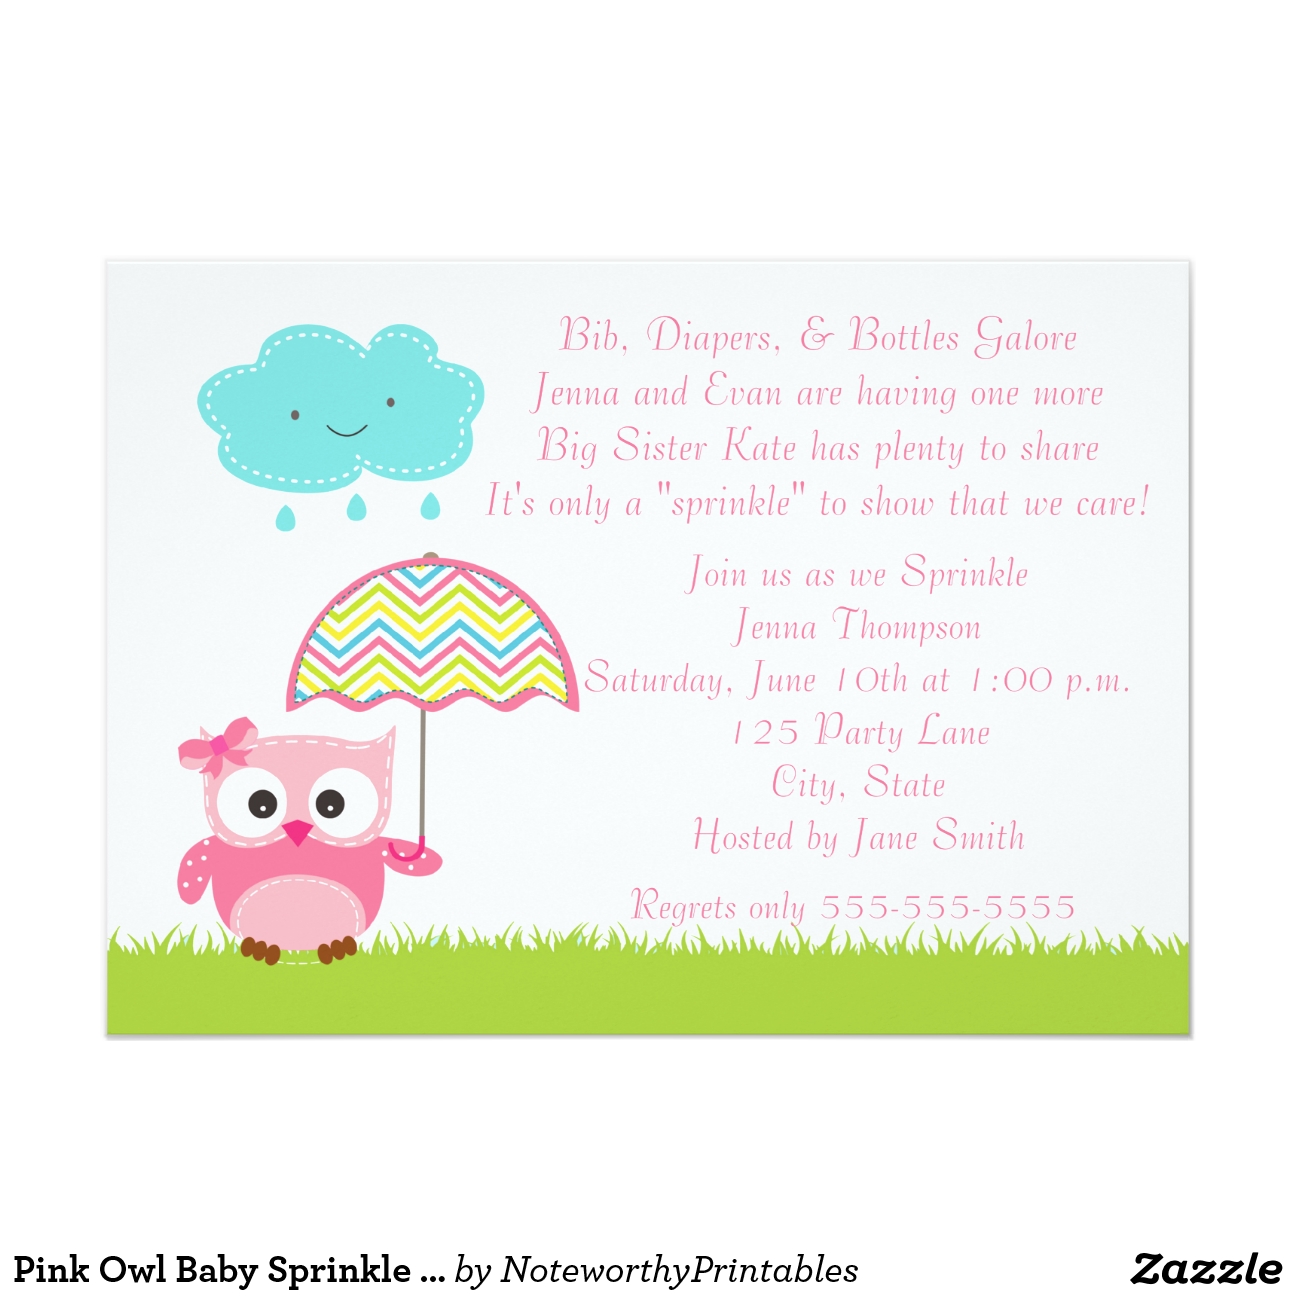 1,000+ Pink Owl Invitations, Pink Owl Announcements  Invites | Zazzle